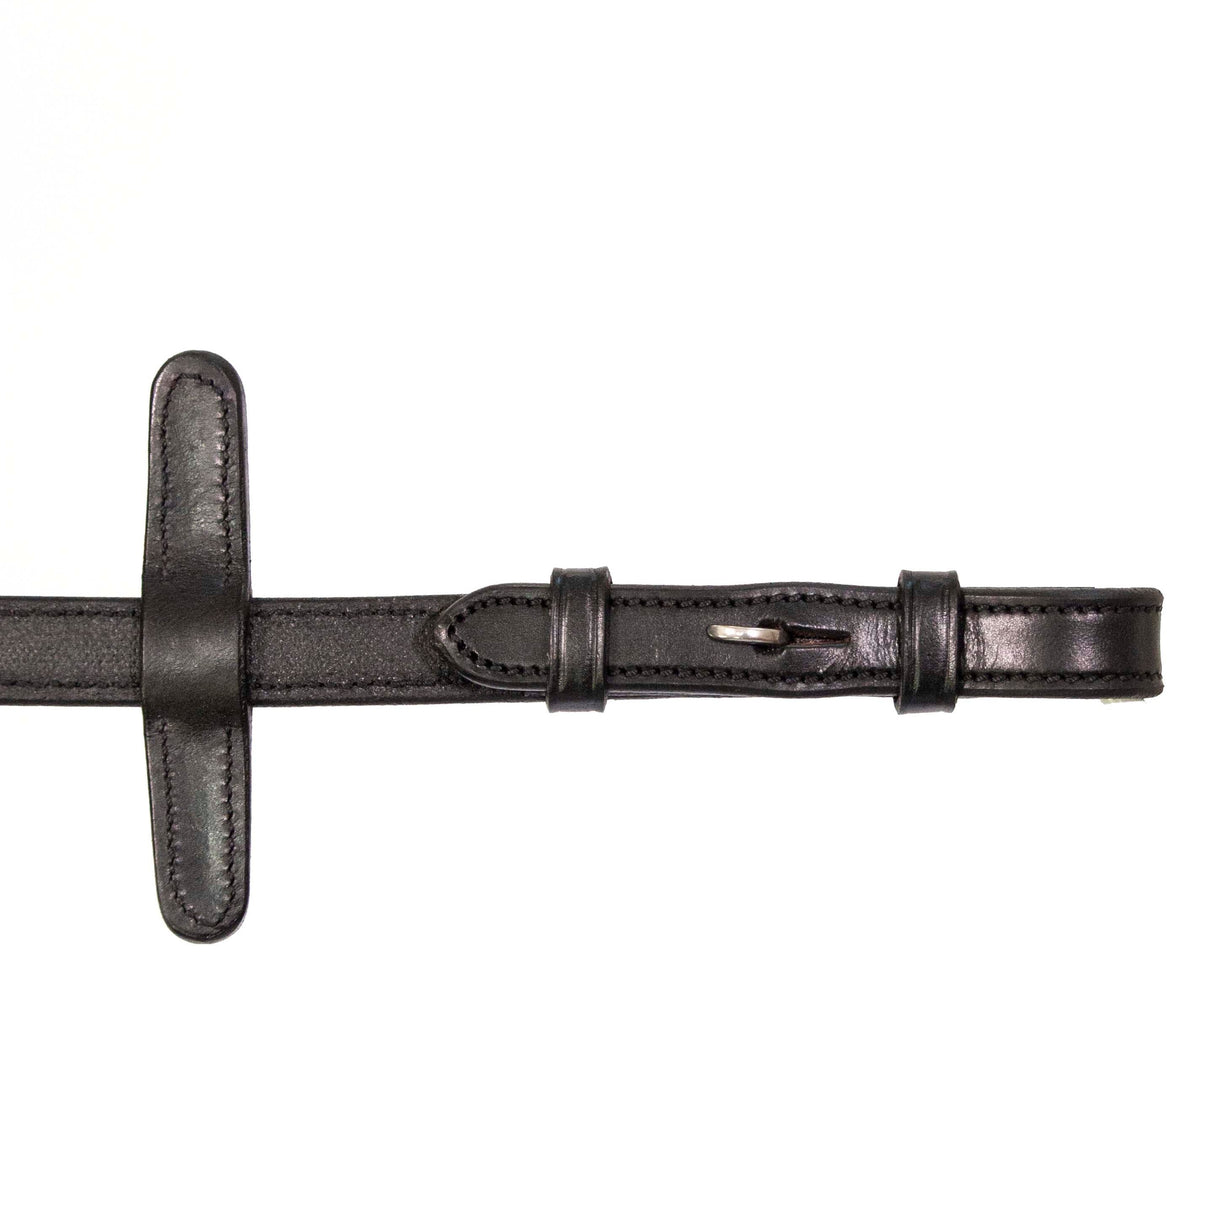 Henry James Xtreme Eventer Hybrid Rubber Reins With Leather Stoppers #Colour_black